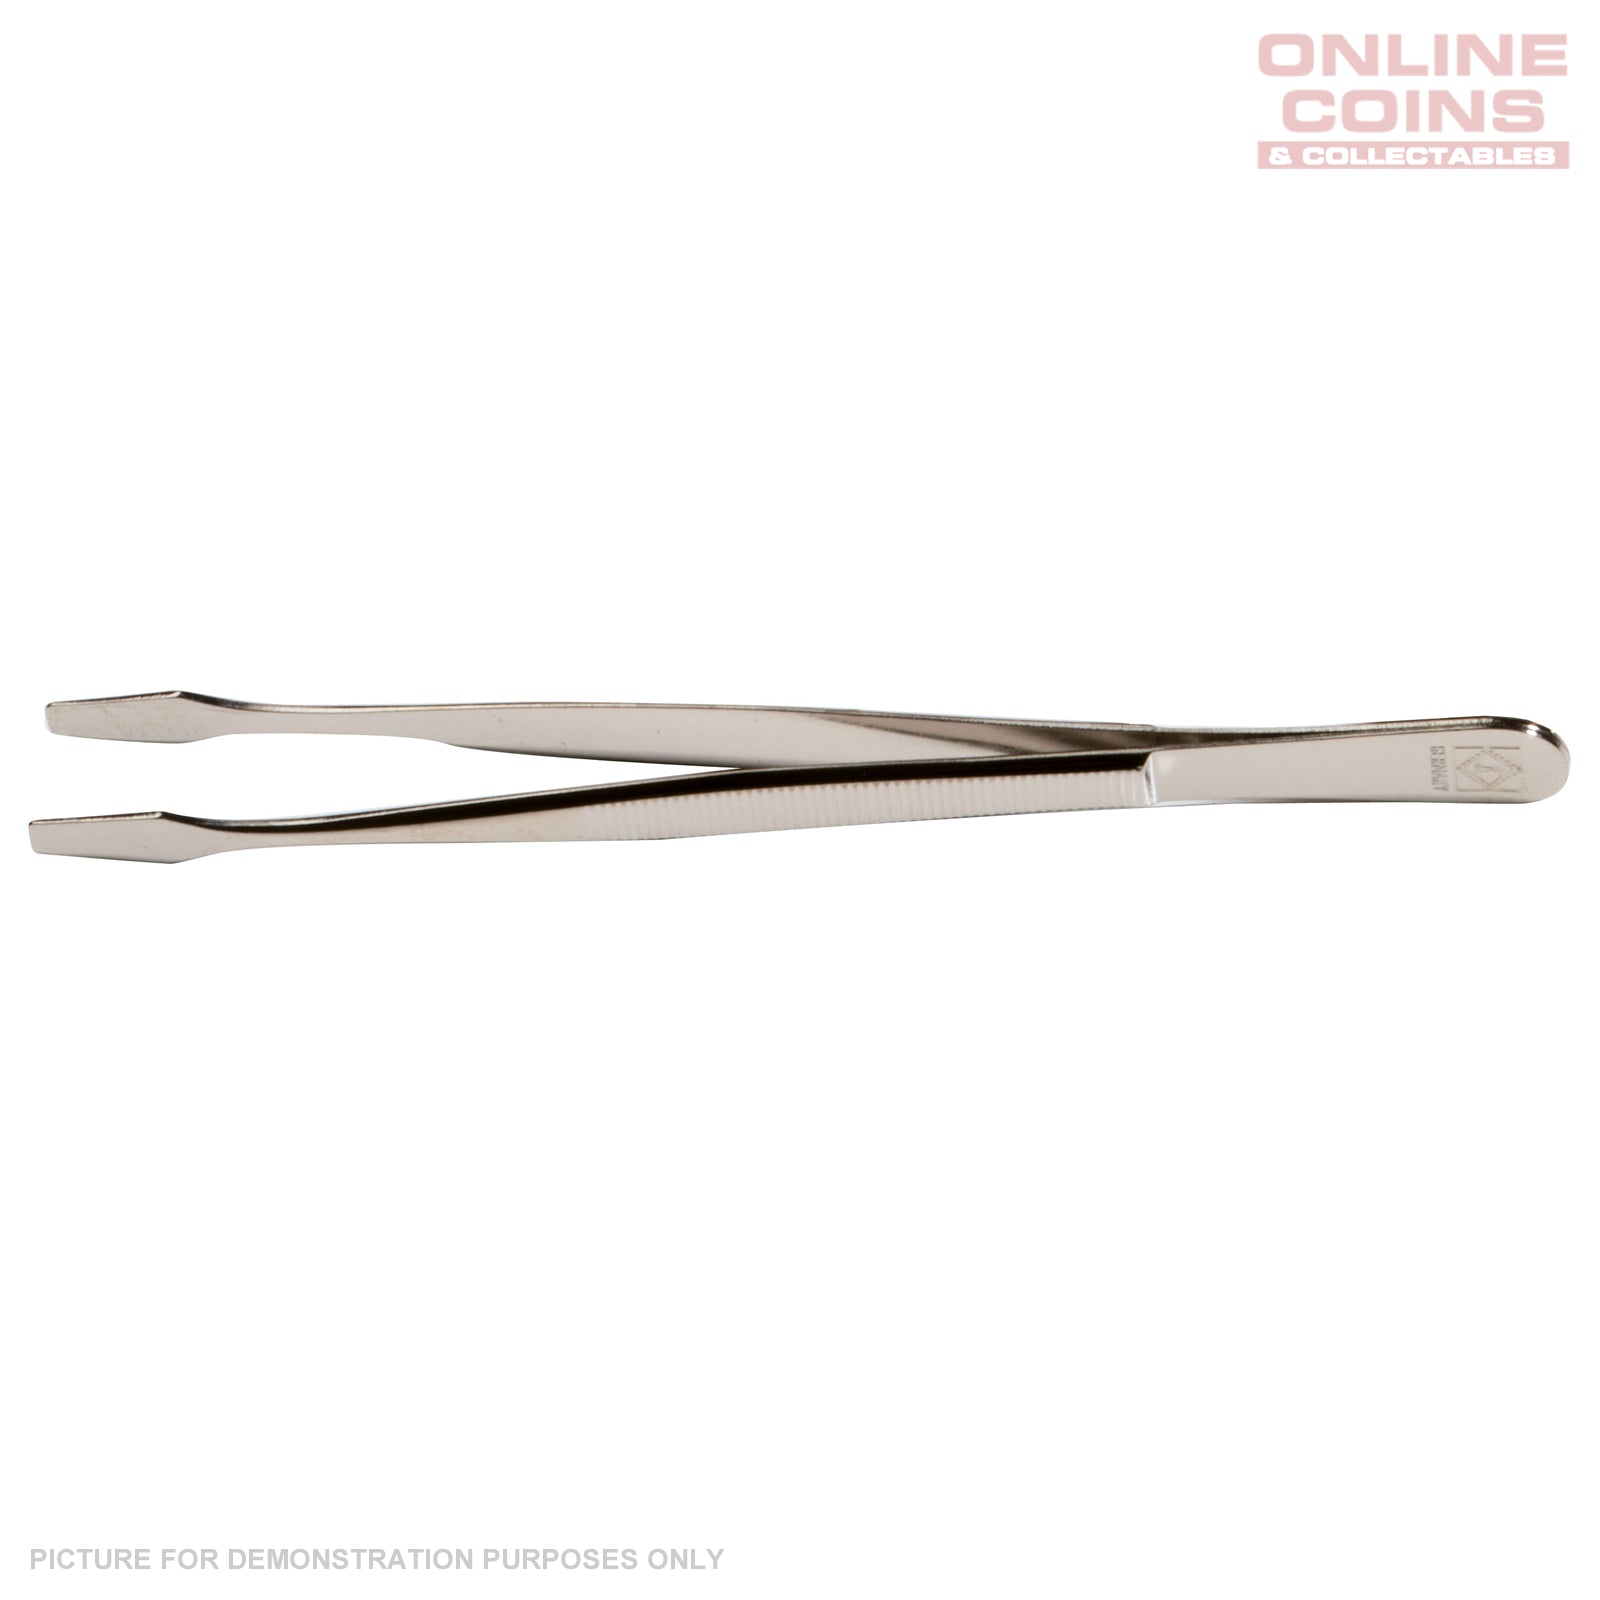 Lighthouse Stamp Tongs Tweezers 32 Deluxe 12 cm - Straight Spade - PI-32